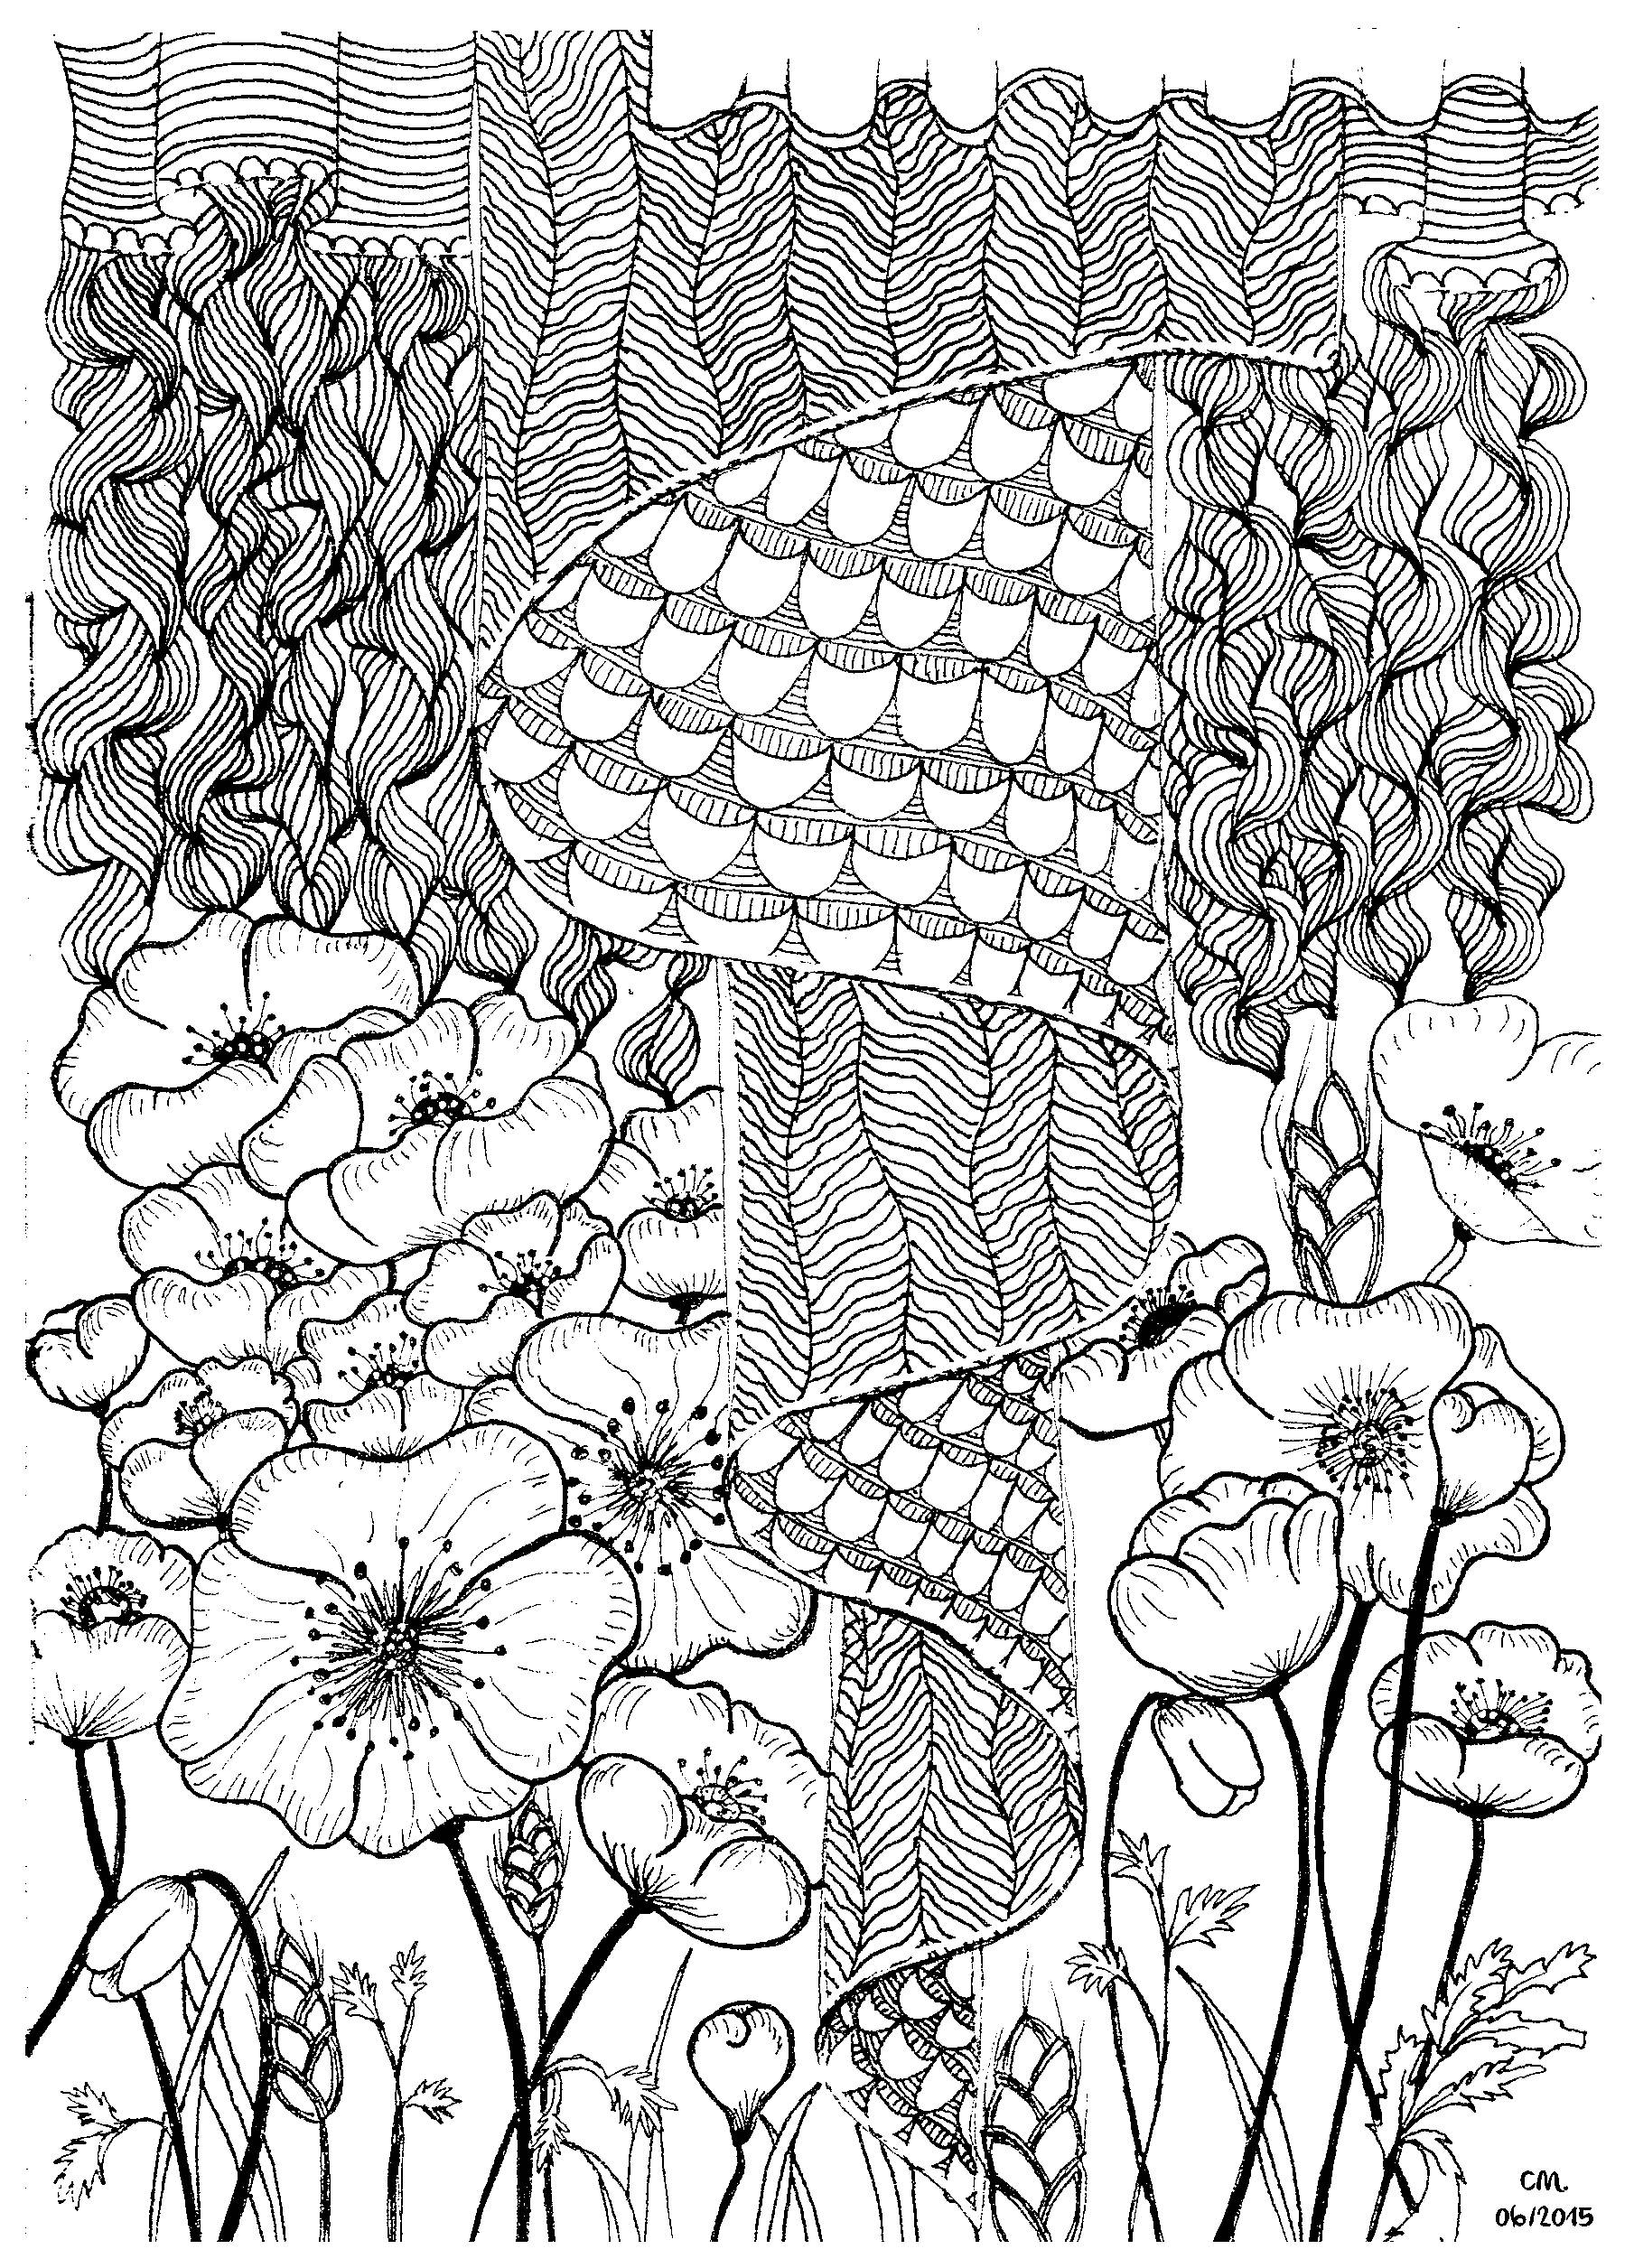 Zentangle coloring page, to color, by Cathy M